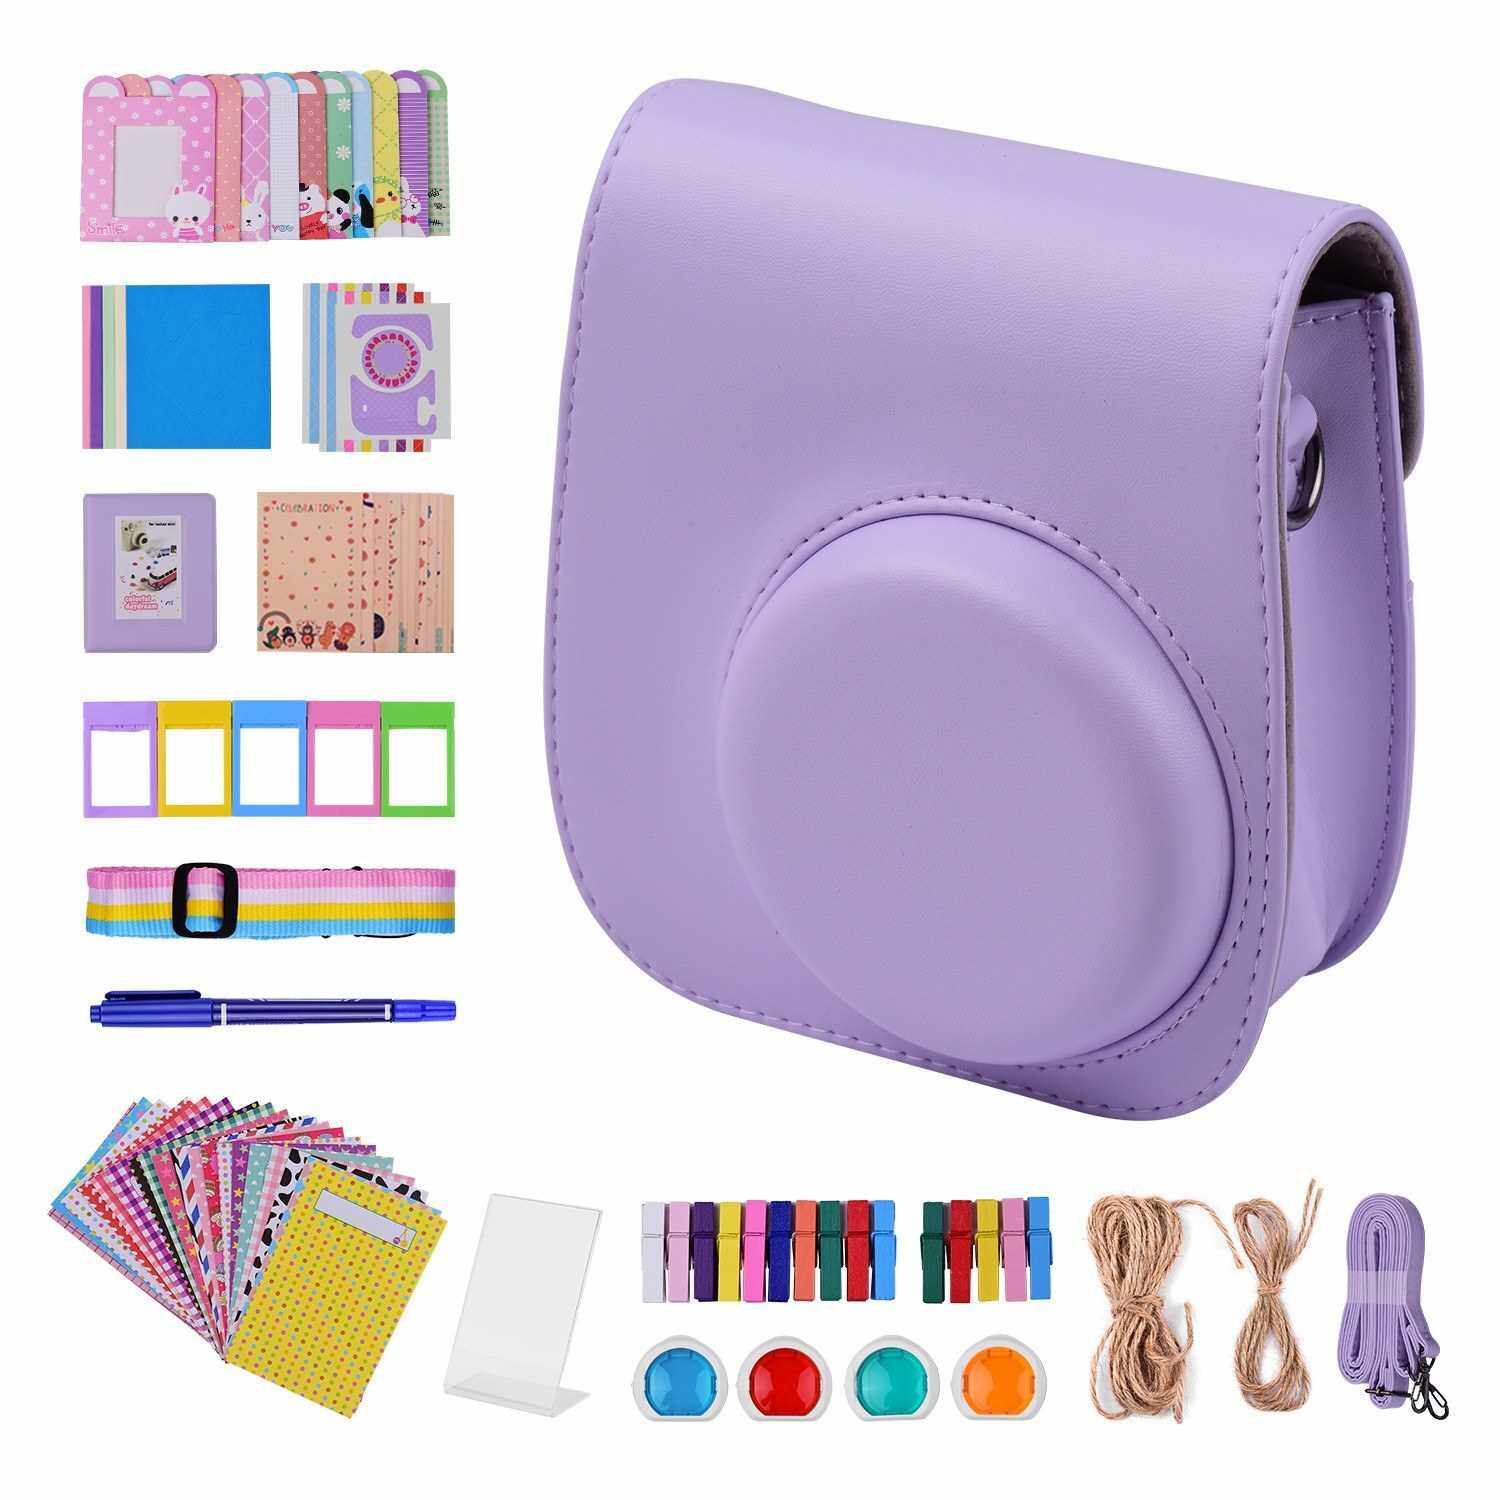 12-in-1 Instant Camera Accessories Bundle Kit Compatible with Fujifilm Instax Mini 11 Including Camera Bag/Camera Strap/Photo Album/Photo Clips/Photo Frame/Hanging String/Stickers/Pen/Filters (Purple)